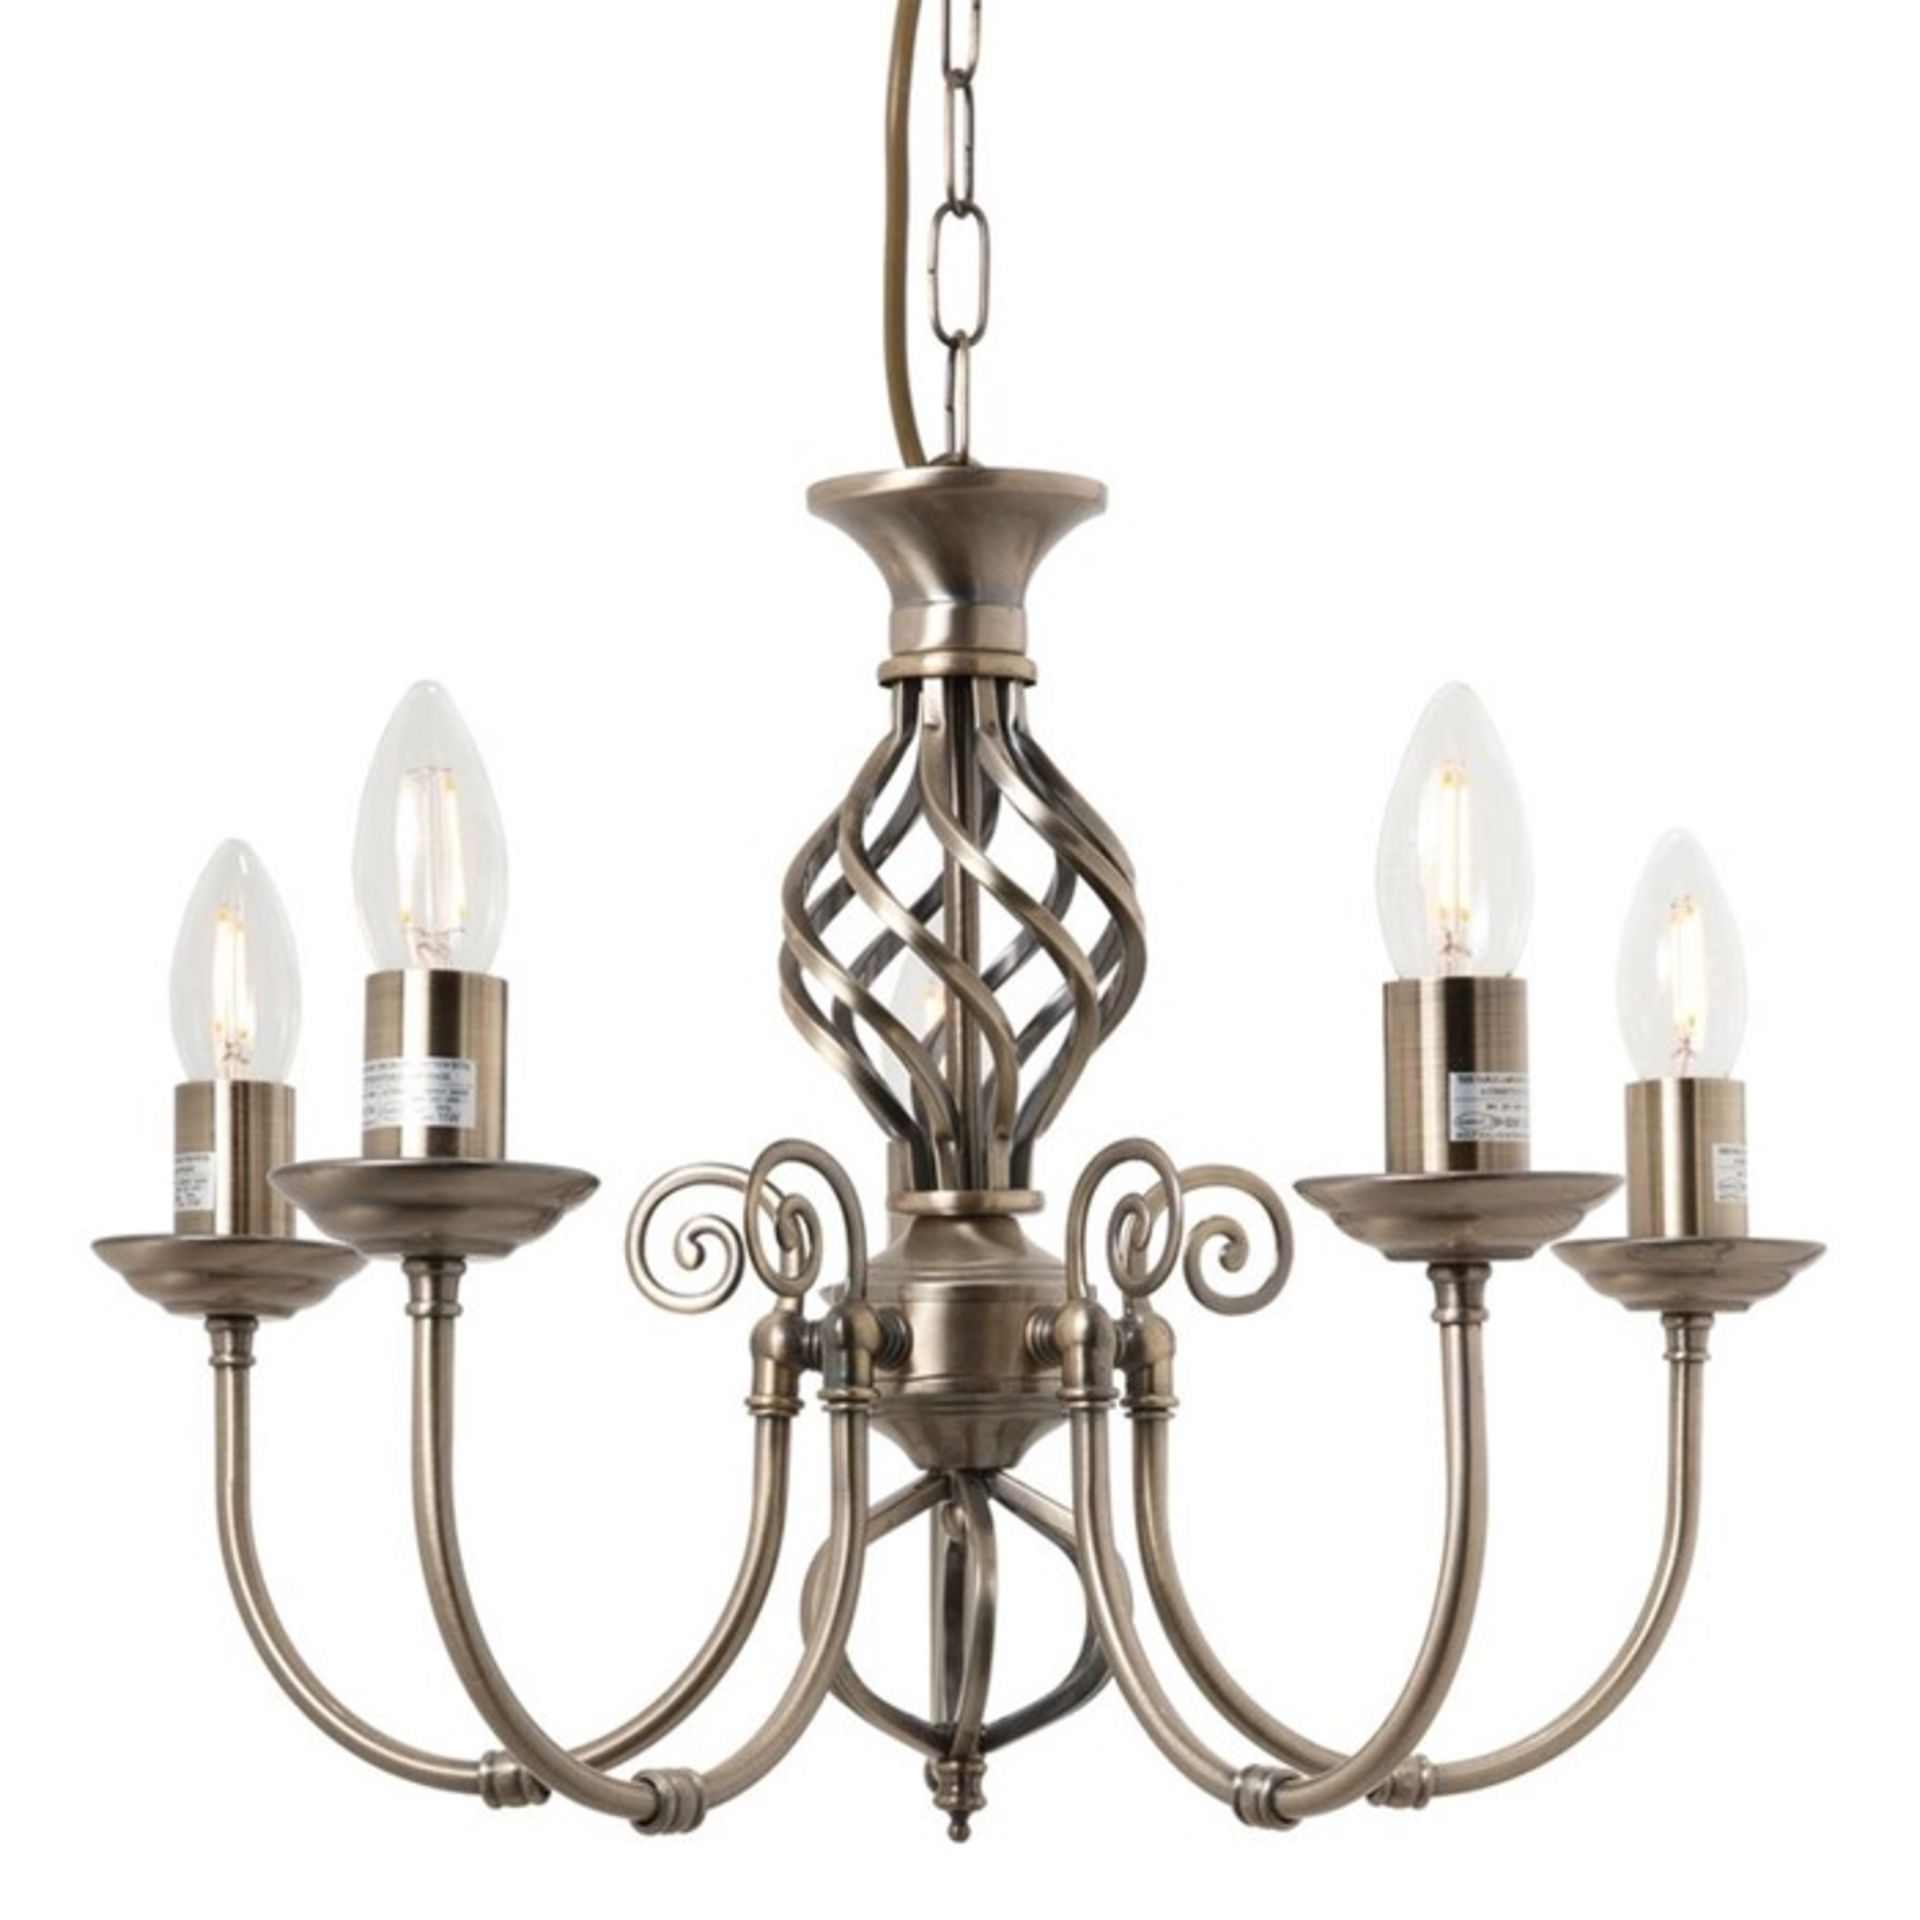 Marlow Home Co., Reynal 5-Light Candle Style Chandelier (ANTIQUE BRASS) - RRP £64.99 (HOKG4366 -